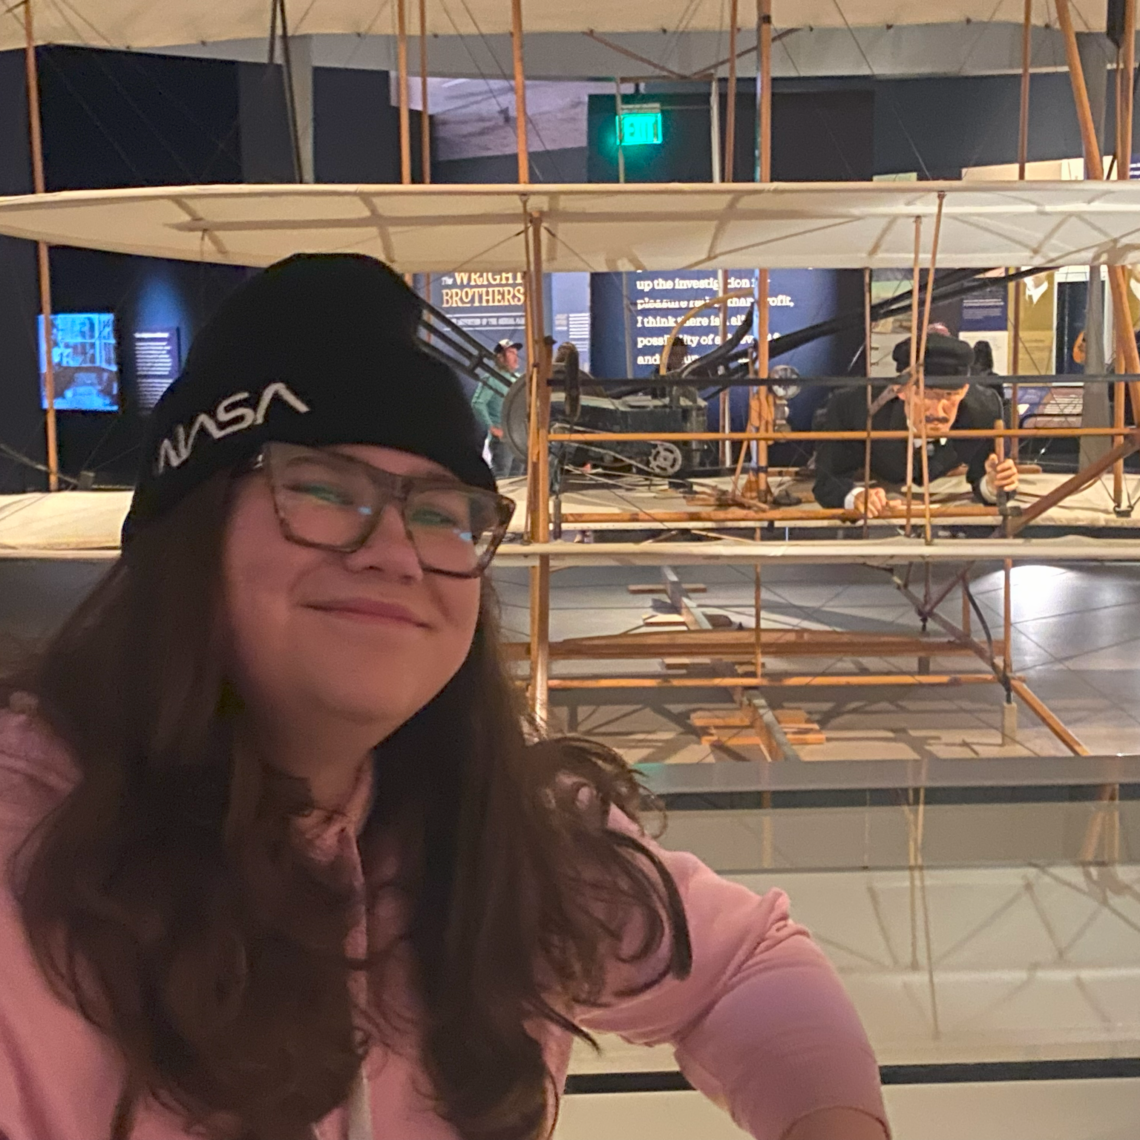 Vivian at the Wright Brothers display at the National Air and Space Museum.